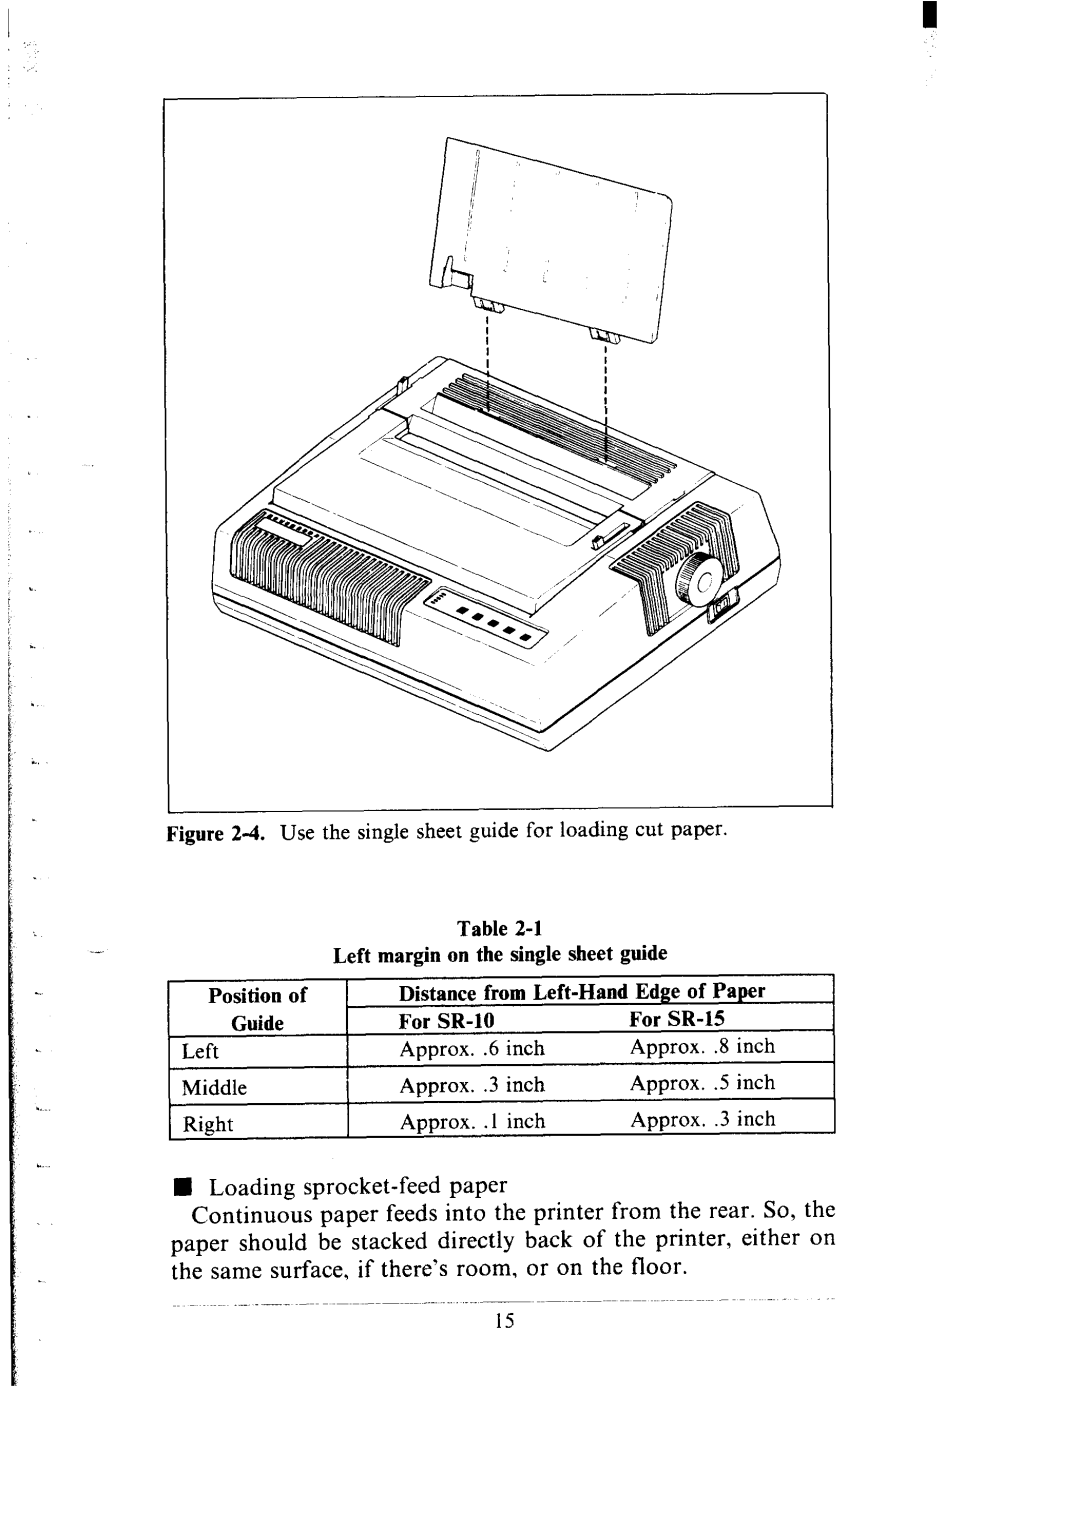 Star Micronics SR-10/I5 Left margin on the single sheet guide, Position of, Distance, from Left-Hand, Edge of, Paper 